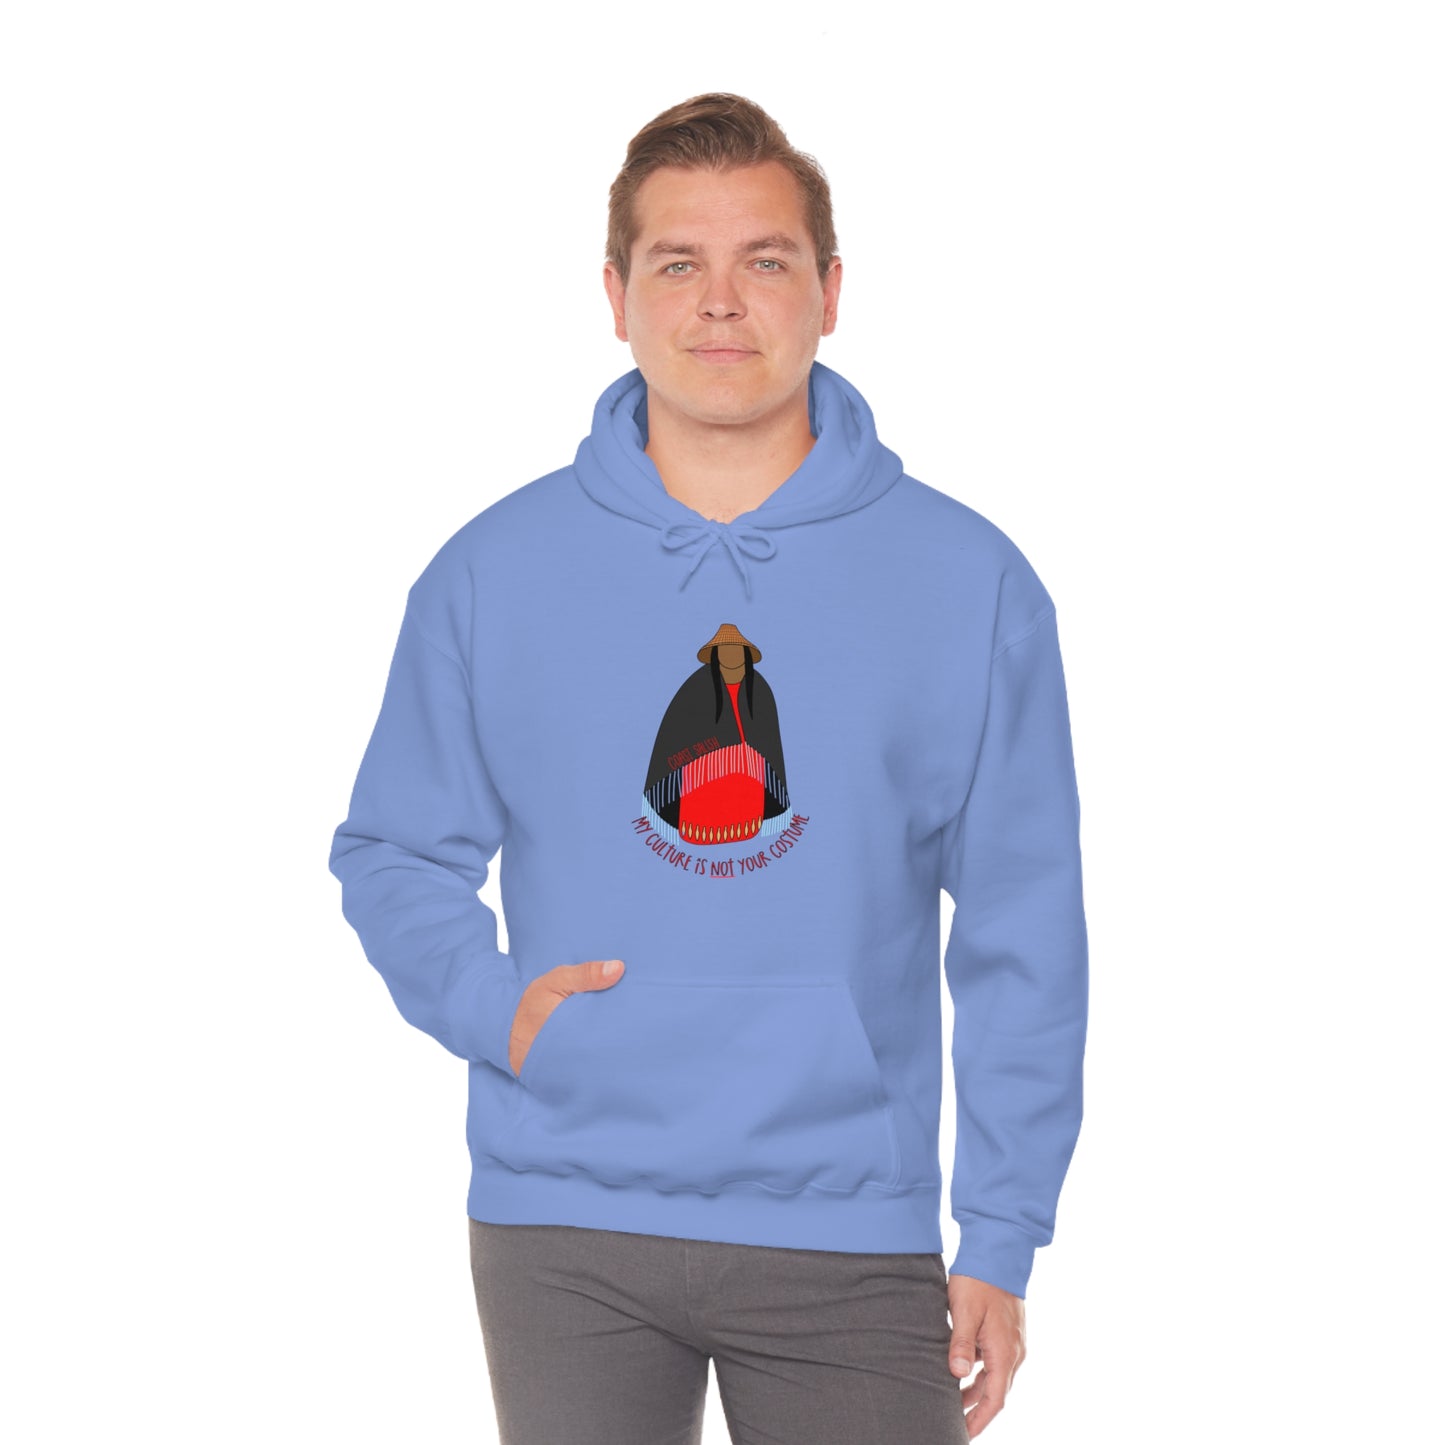 My Culture Is Not Your Costume Hoodie